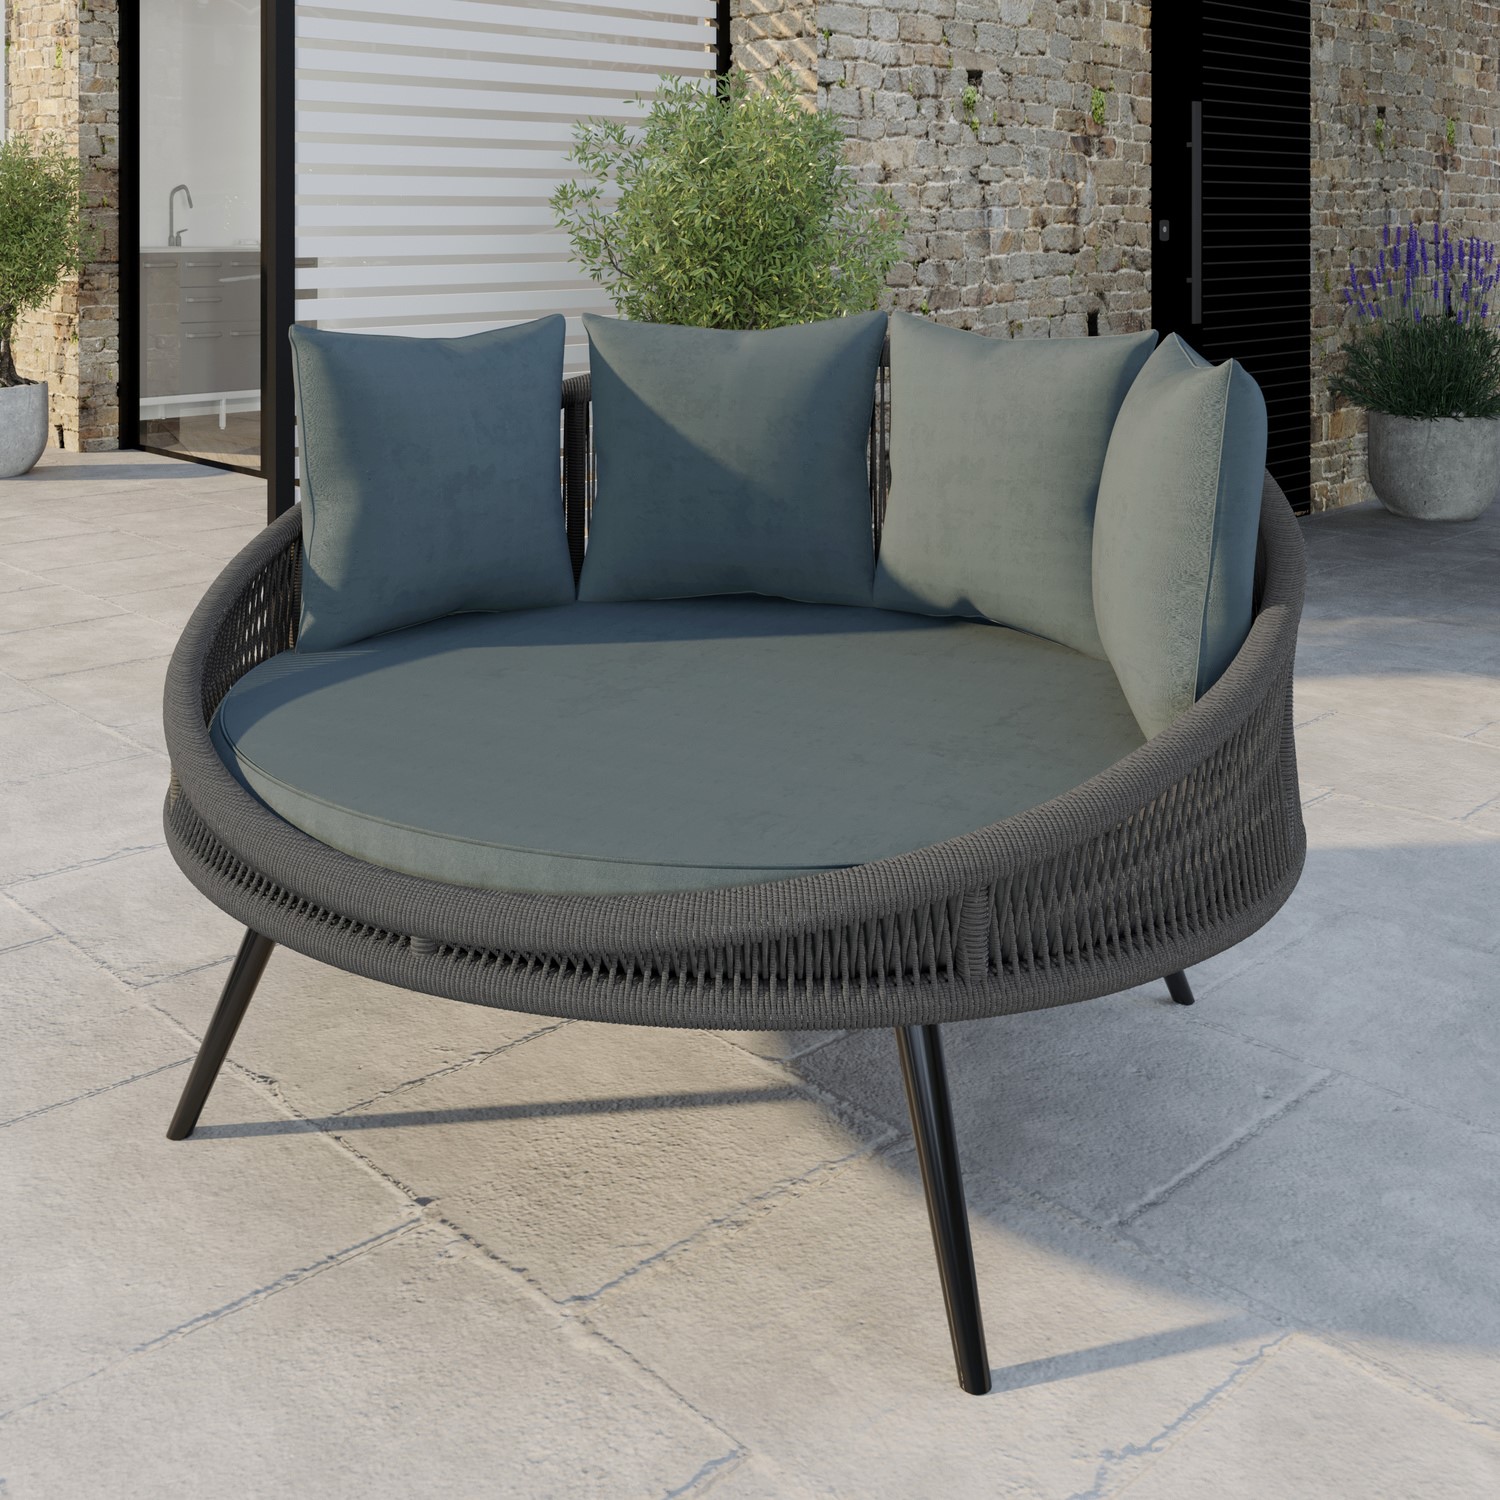 Read more about Grey round rope effect garden day bed como